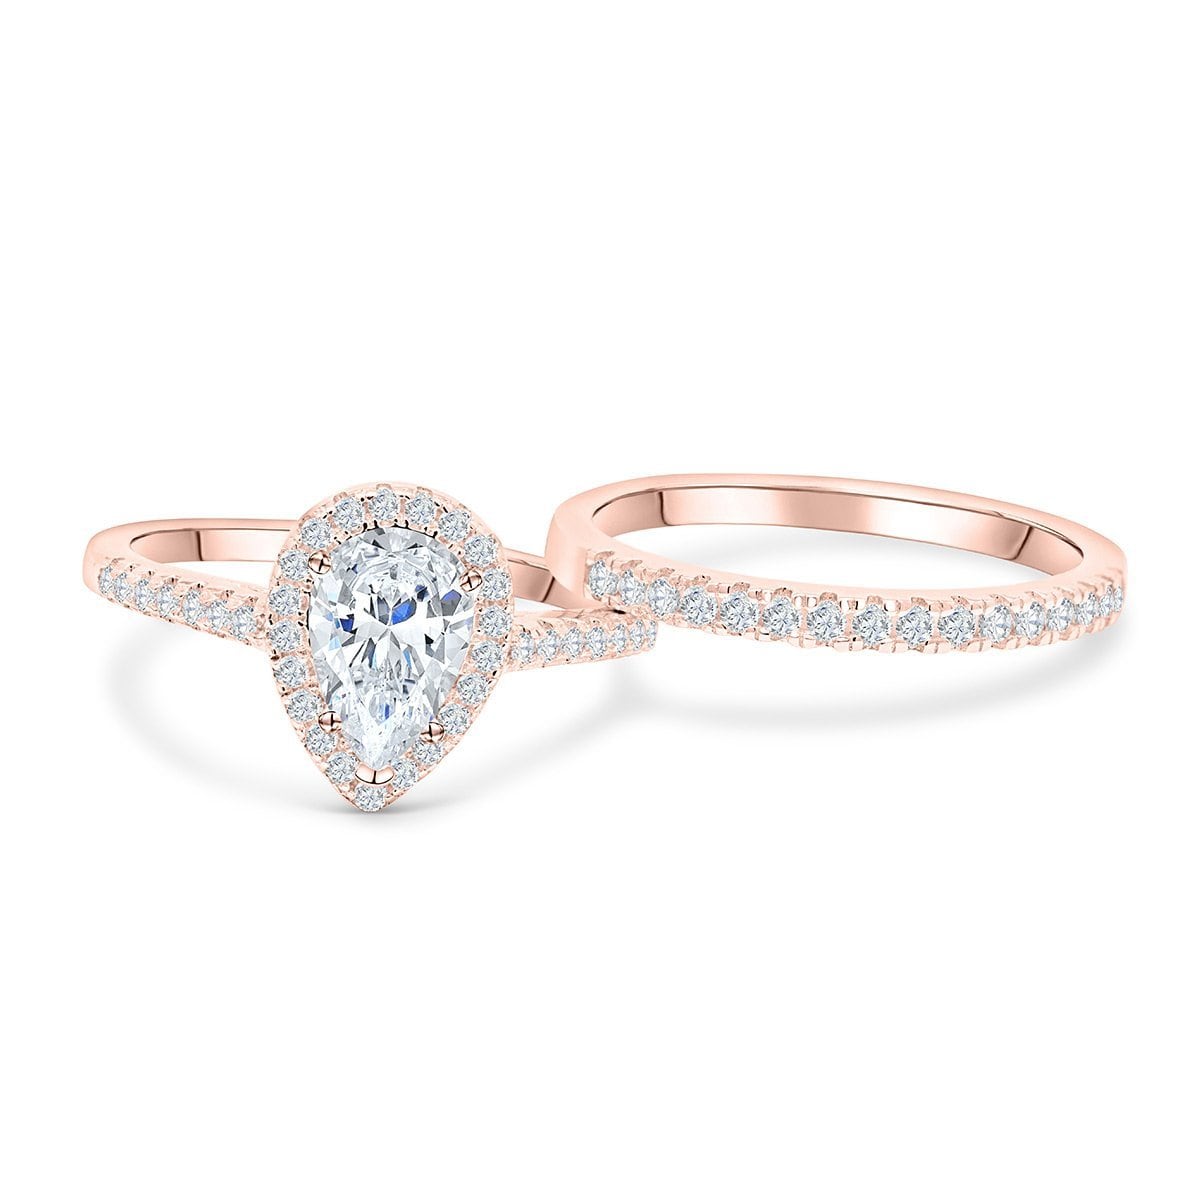 the bliss rose gold pear engagement ring